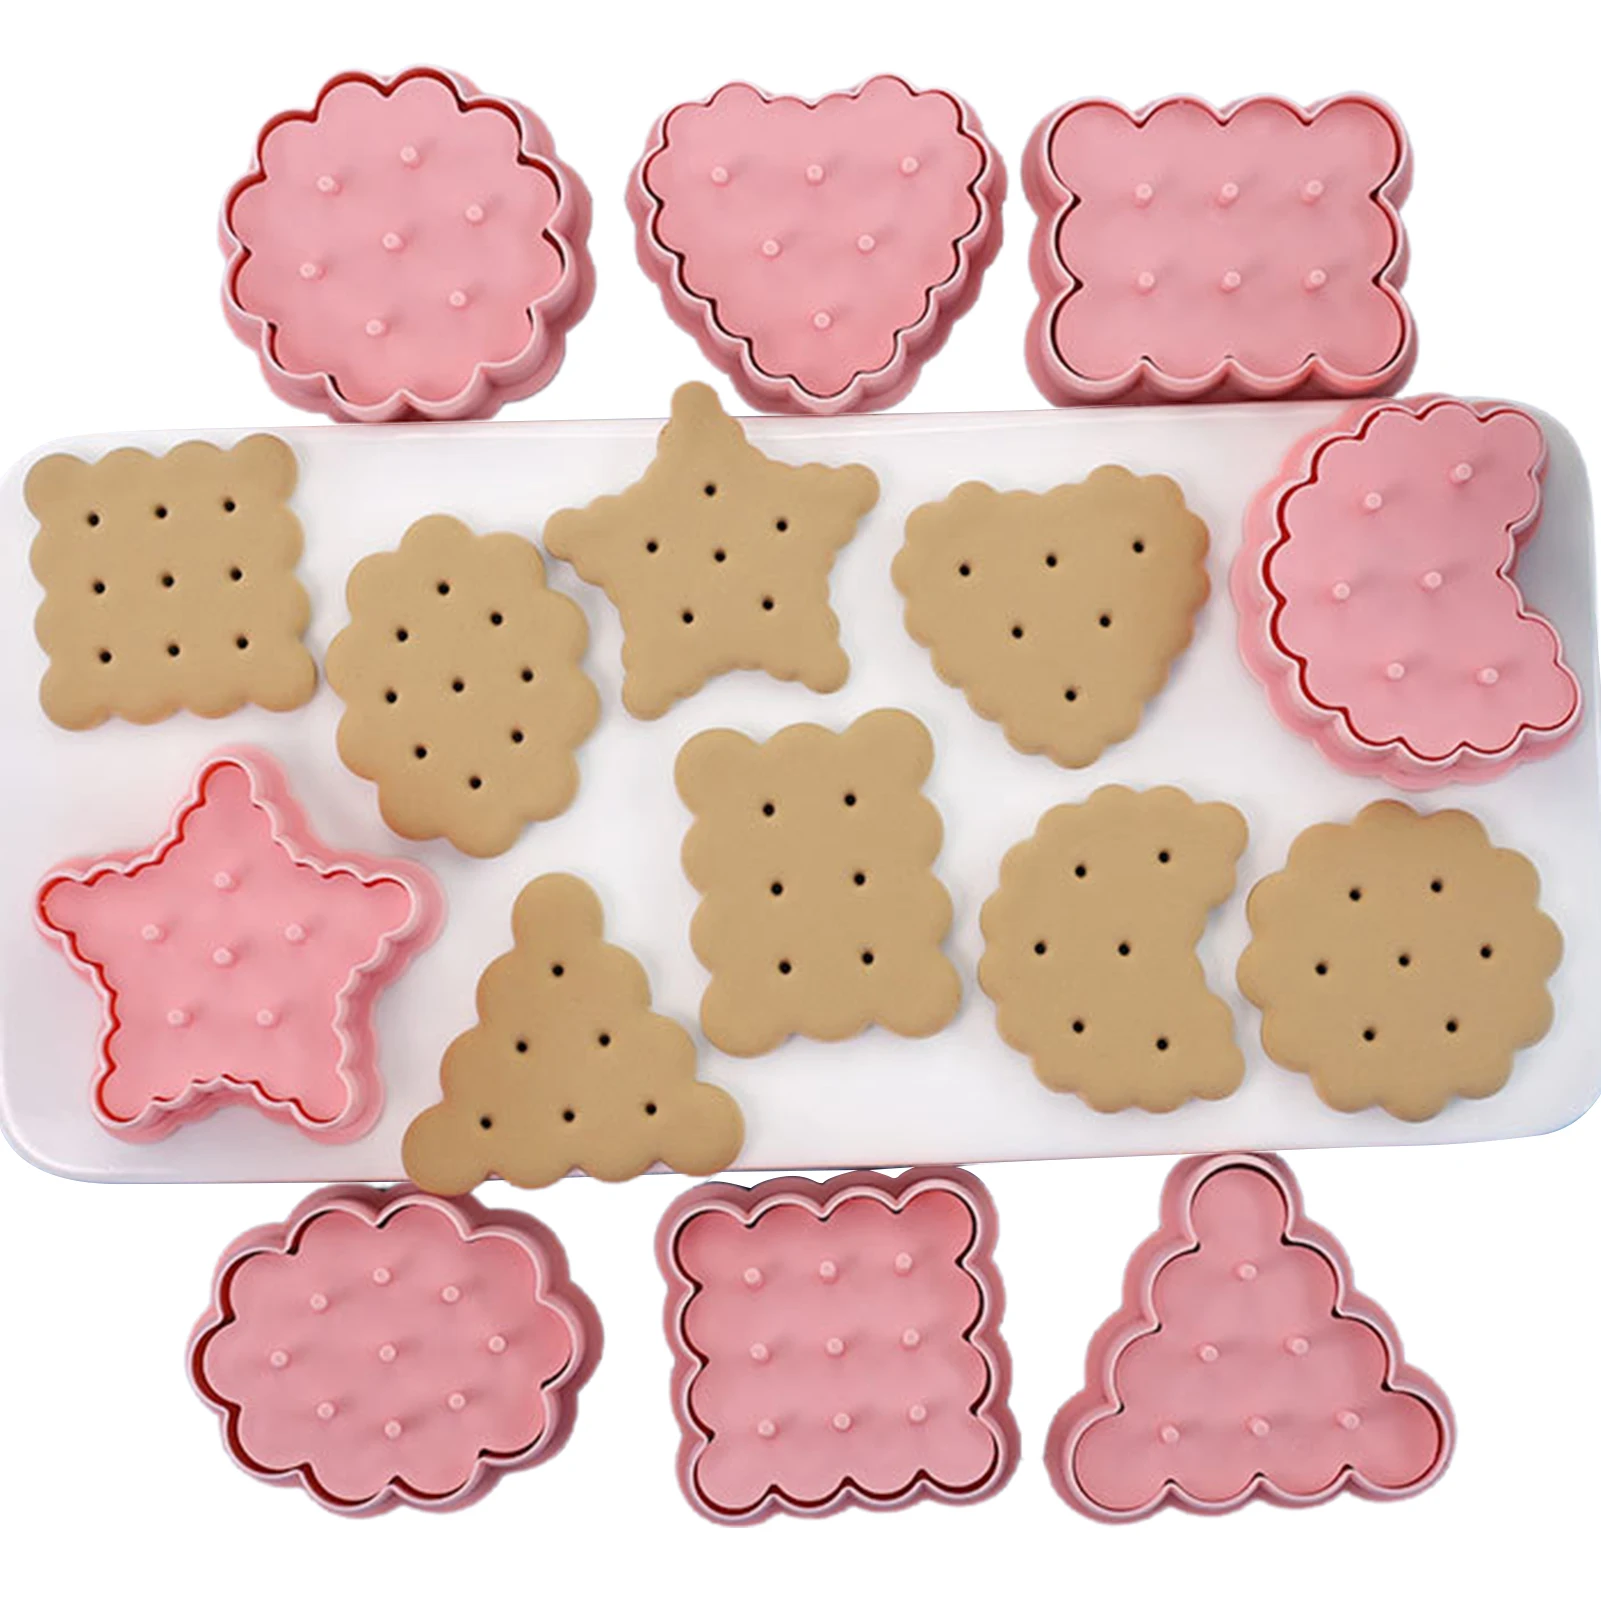 

Cute Cookie Cutters Shapes DIY Biscuit Mold Set Clear 3D Heart Flower Star Shape Embossing Baking Tool For Pastry Fondant Cheese